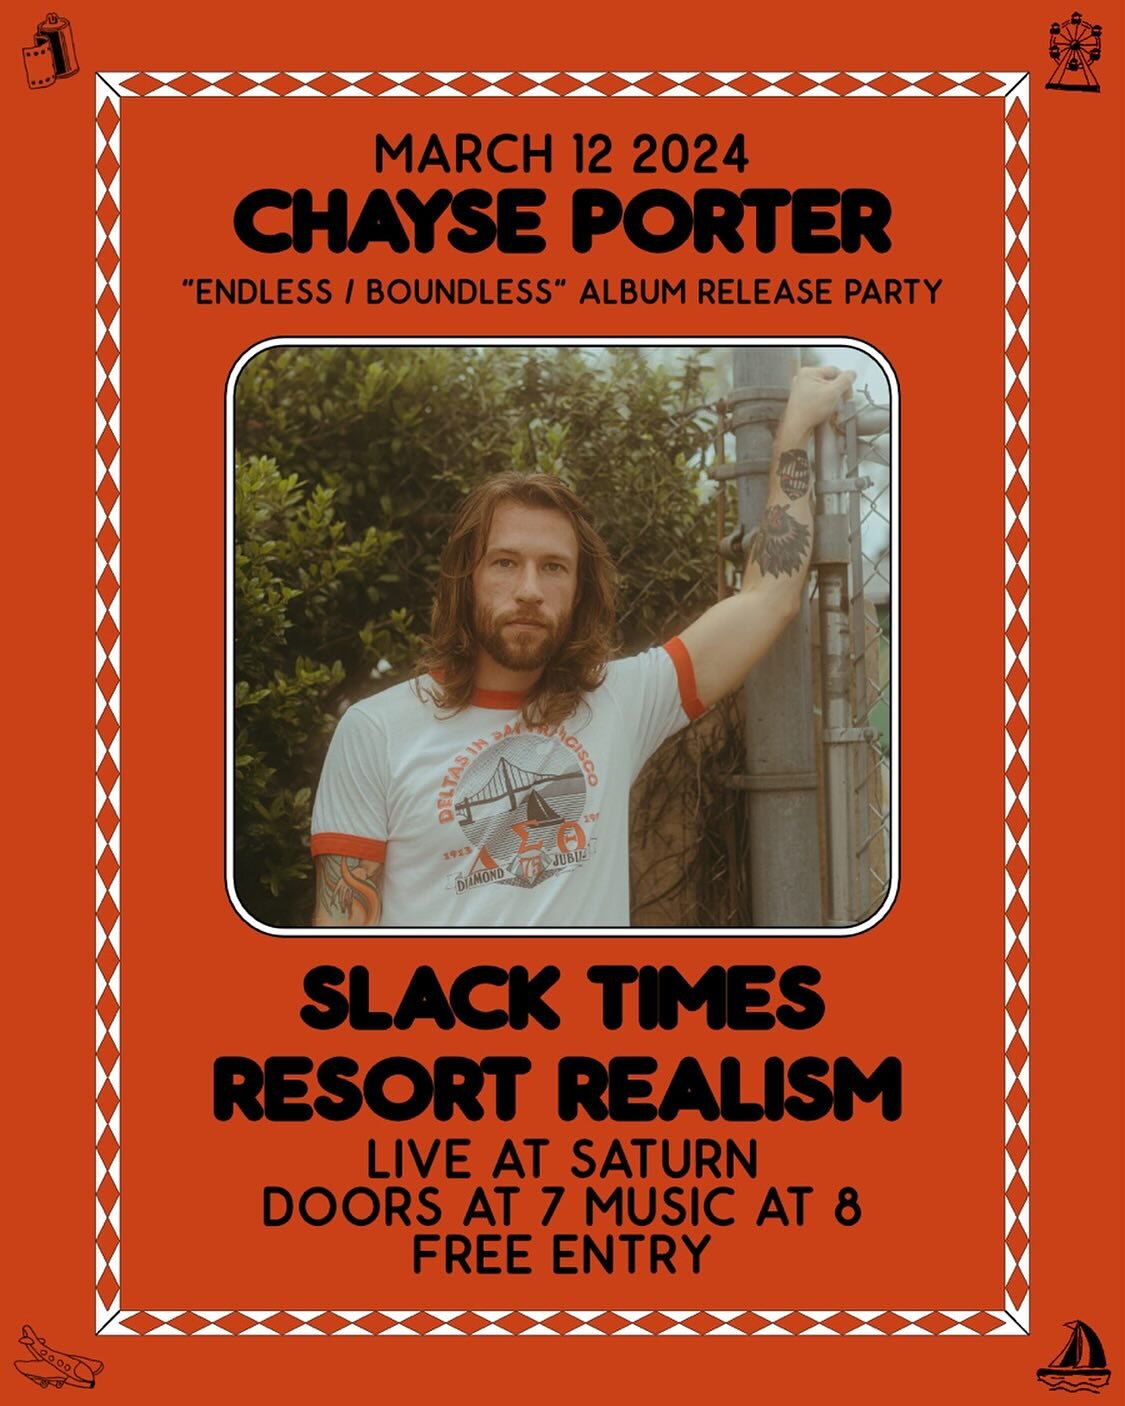 Coming soon! Celebrating the release of the new @chayseporter record, joined by @slacktimes and @resortrealism🌴🪩 Free as can be&mdash; the chillest of the chill😯